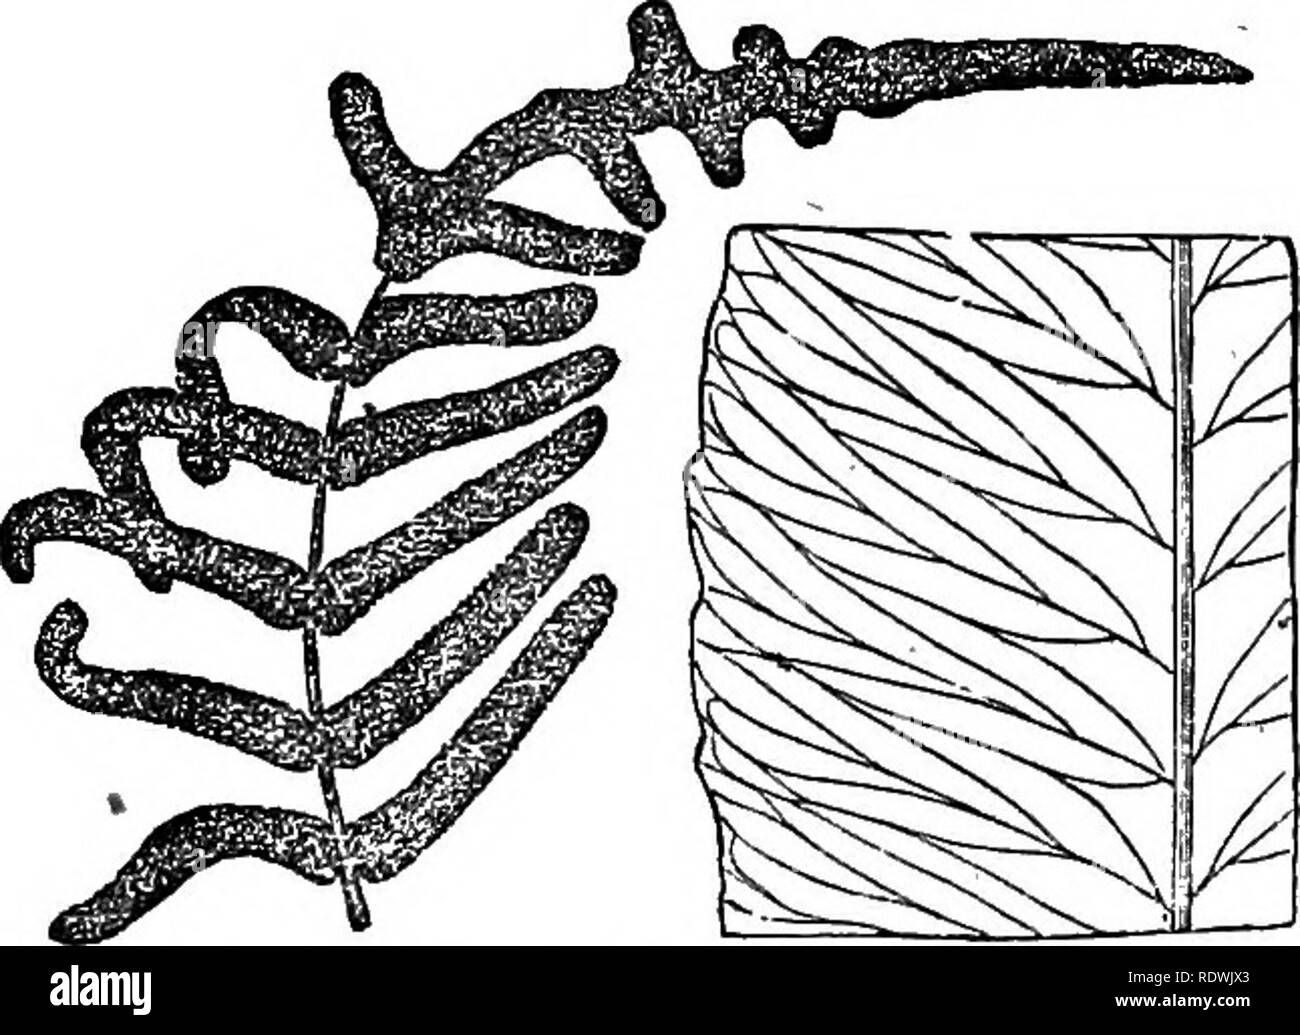 . Ferns: British &amp; foreign. The history, organography, classification, and enumeration of the species of garden ferns with a treatise on their cultivation, etc. etc. Ferns. Genua^S^.—Portioii of the barren pinna, under side. No. 1. marginal vein. Fertile pimnce linear or pinnatifid, convolute, wholly sporangiferous. 1. O. cervina, Fresl; Hooh. Fil. Exot. i. 43; Lowe's Ferns, 7, it. 39, 40. Acrostichum cervinum, Svi.; Pl/wm. Fil. 1.154; Sook. et Grev. Ic. Fil. t. 81. O. Corcovadensis, Badd. Fil. Bras. t. 14; Hook. Gen. Fil. t. 79 A. Acrostichum linearifolium, Presl.—Tropical America. *** Vd Stock Photo